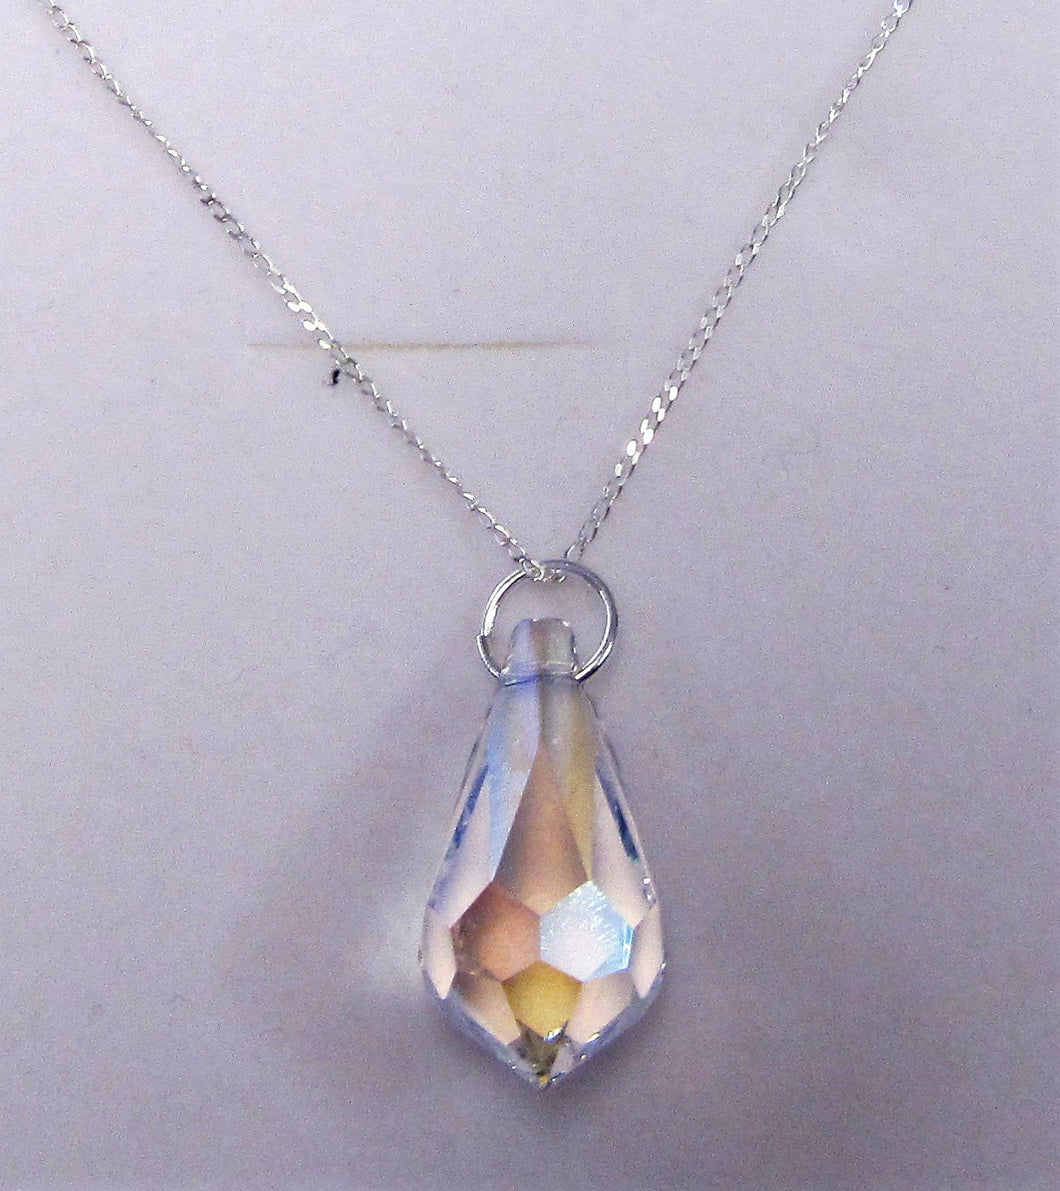 Handcrafted 925 sterling silver necklace with clear swarovski crystal pendant